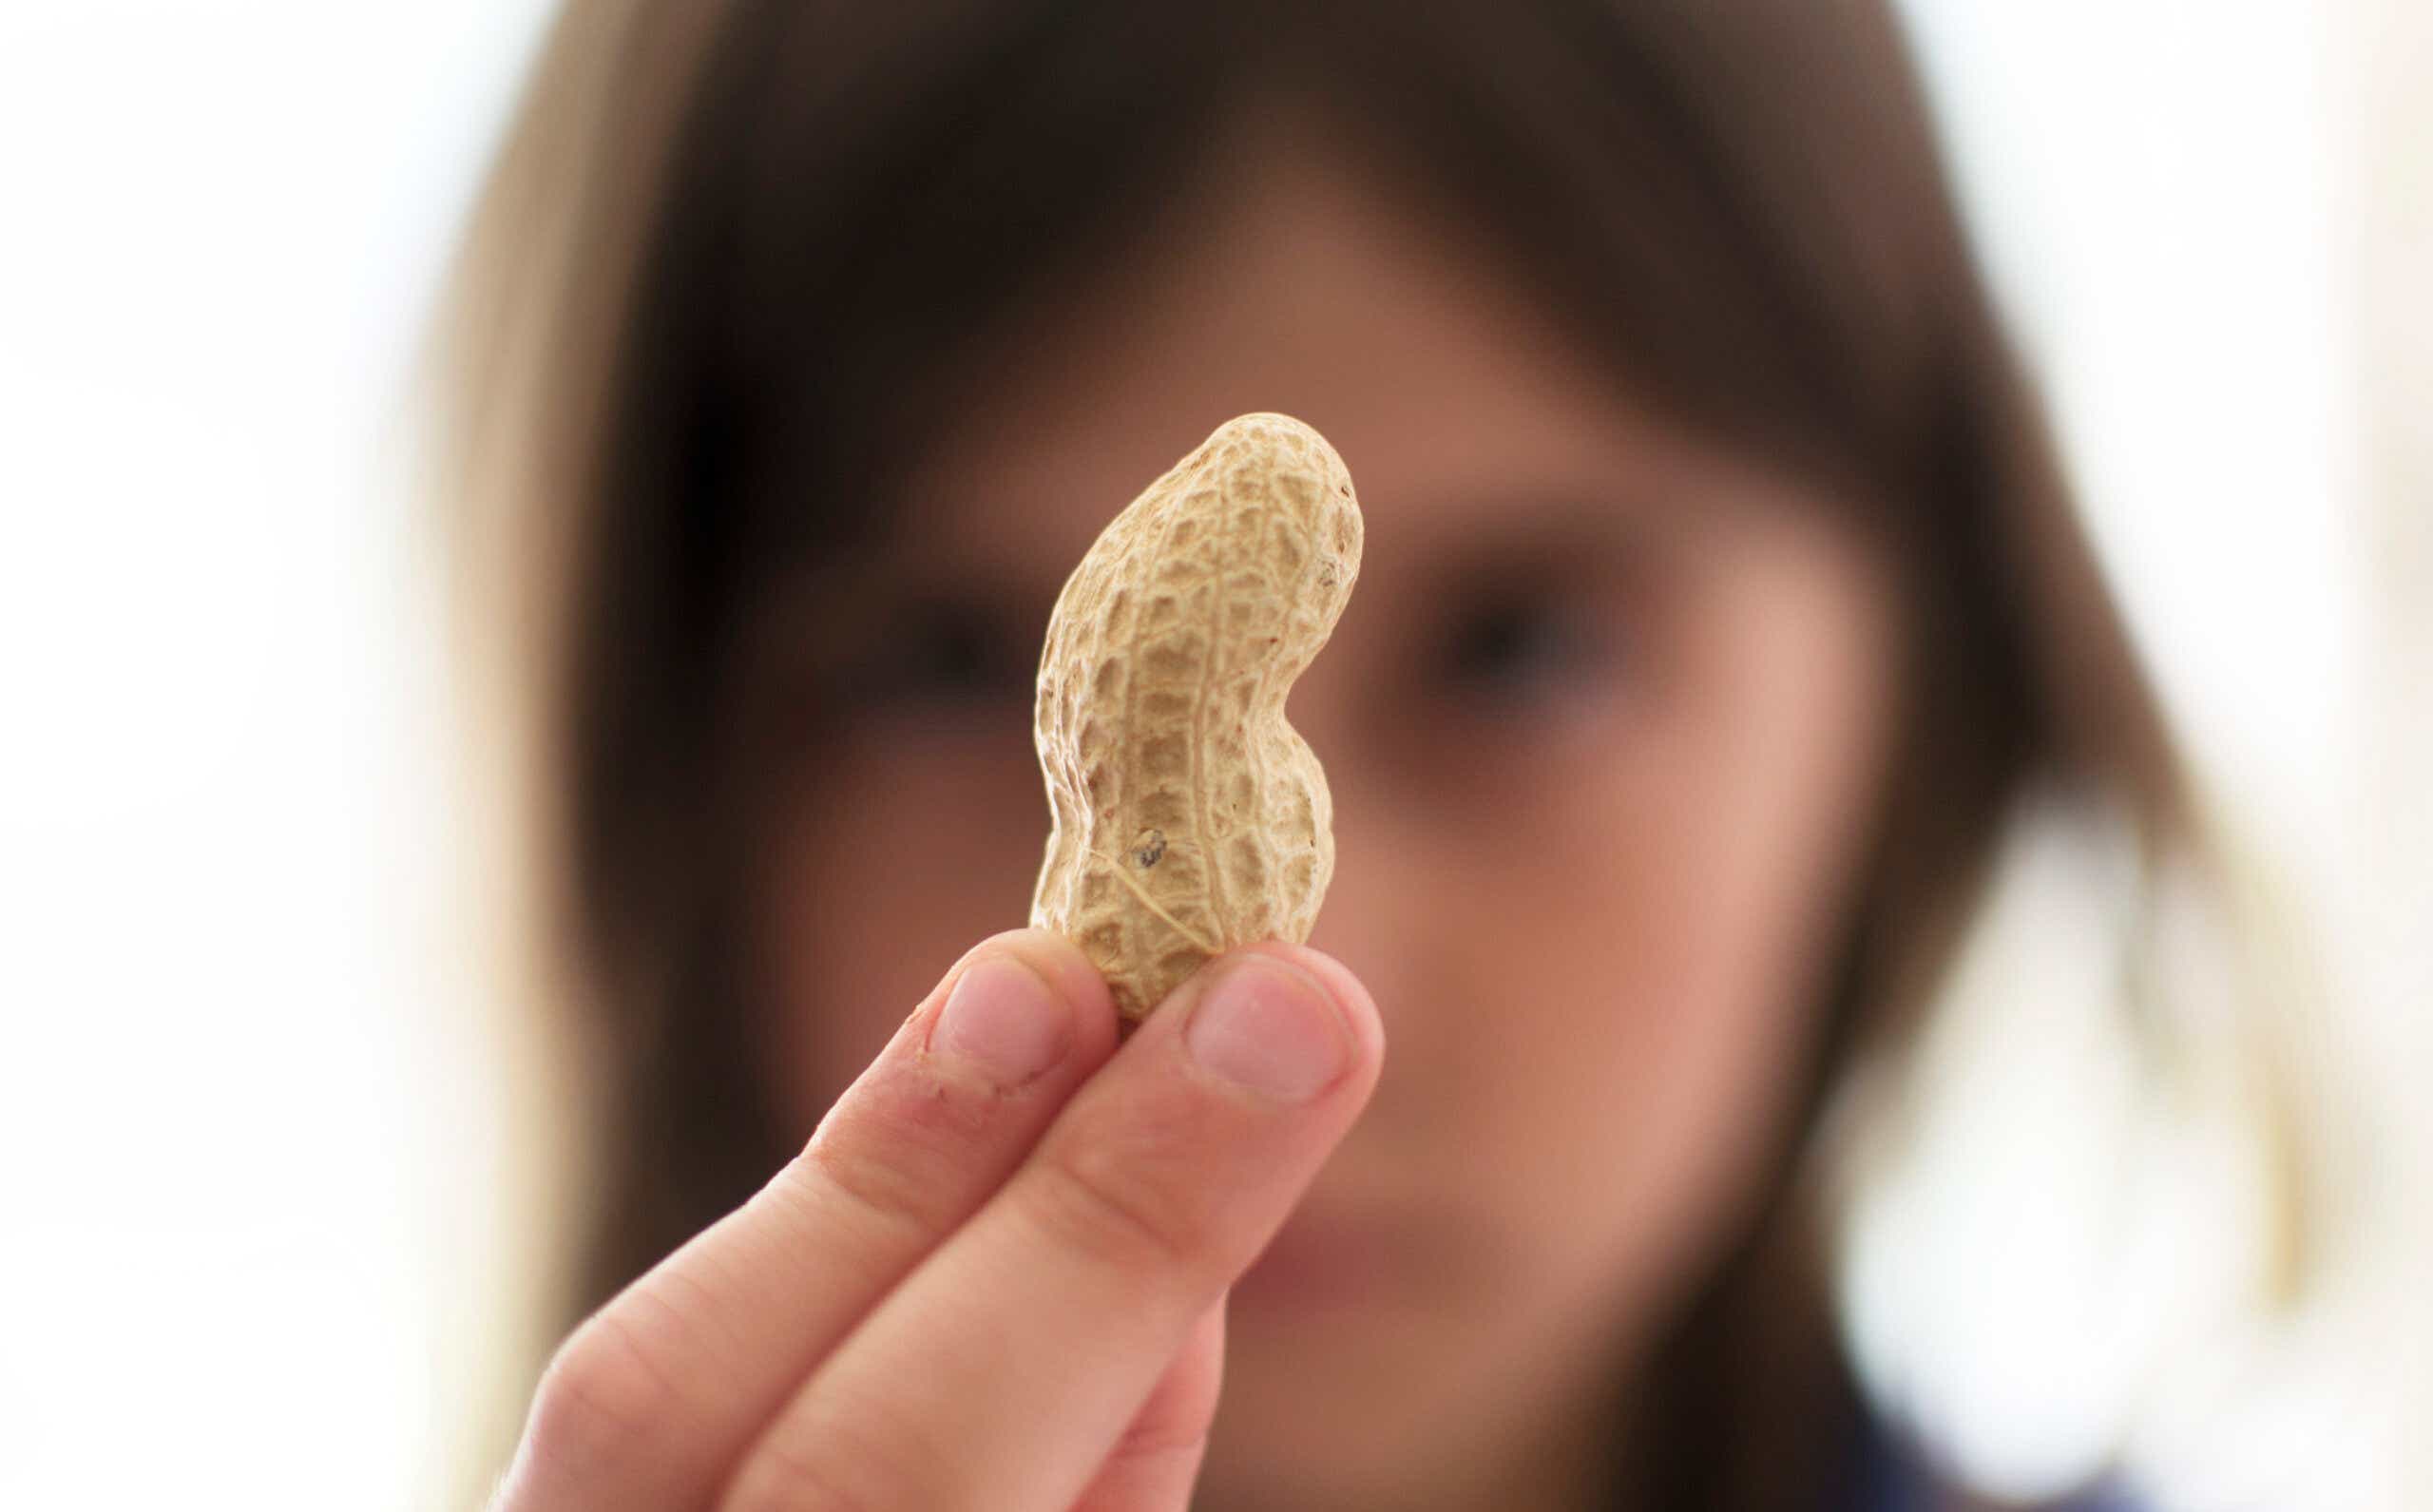 A young child holds up a peanut looks at it closely.